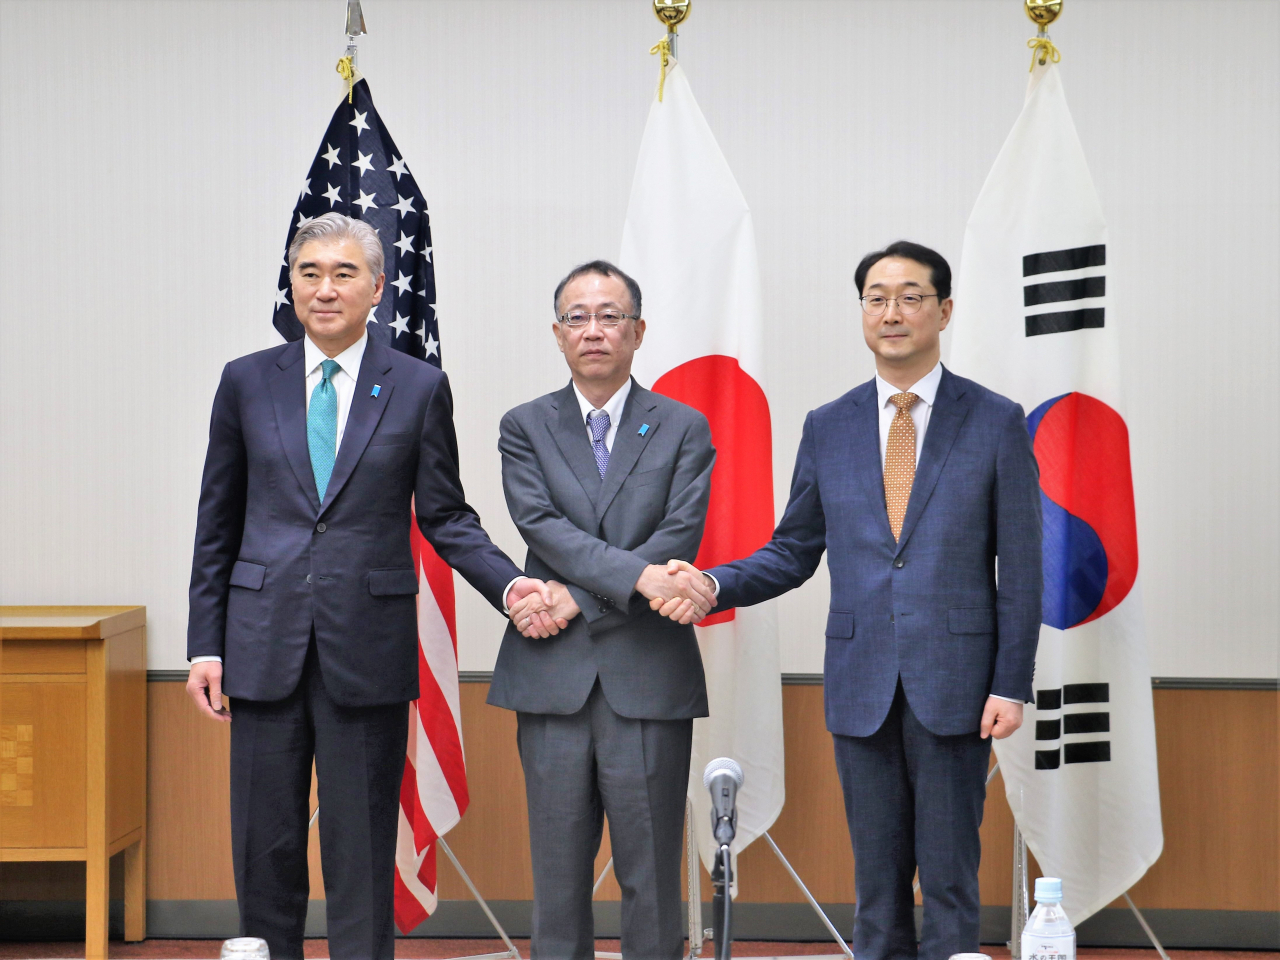 Kim Gunn (right) poses for a photo with Takahiro Funakoshi of Japan (center) and Sung Kim of the US at a trilateral meeting on issues related to North Korea held in Karuizawa, Nagano prefecture, Japan on July 20, 2023. (Ministry of Foreign Affairs via Newsis)